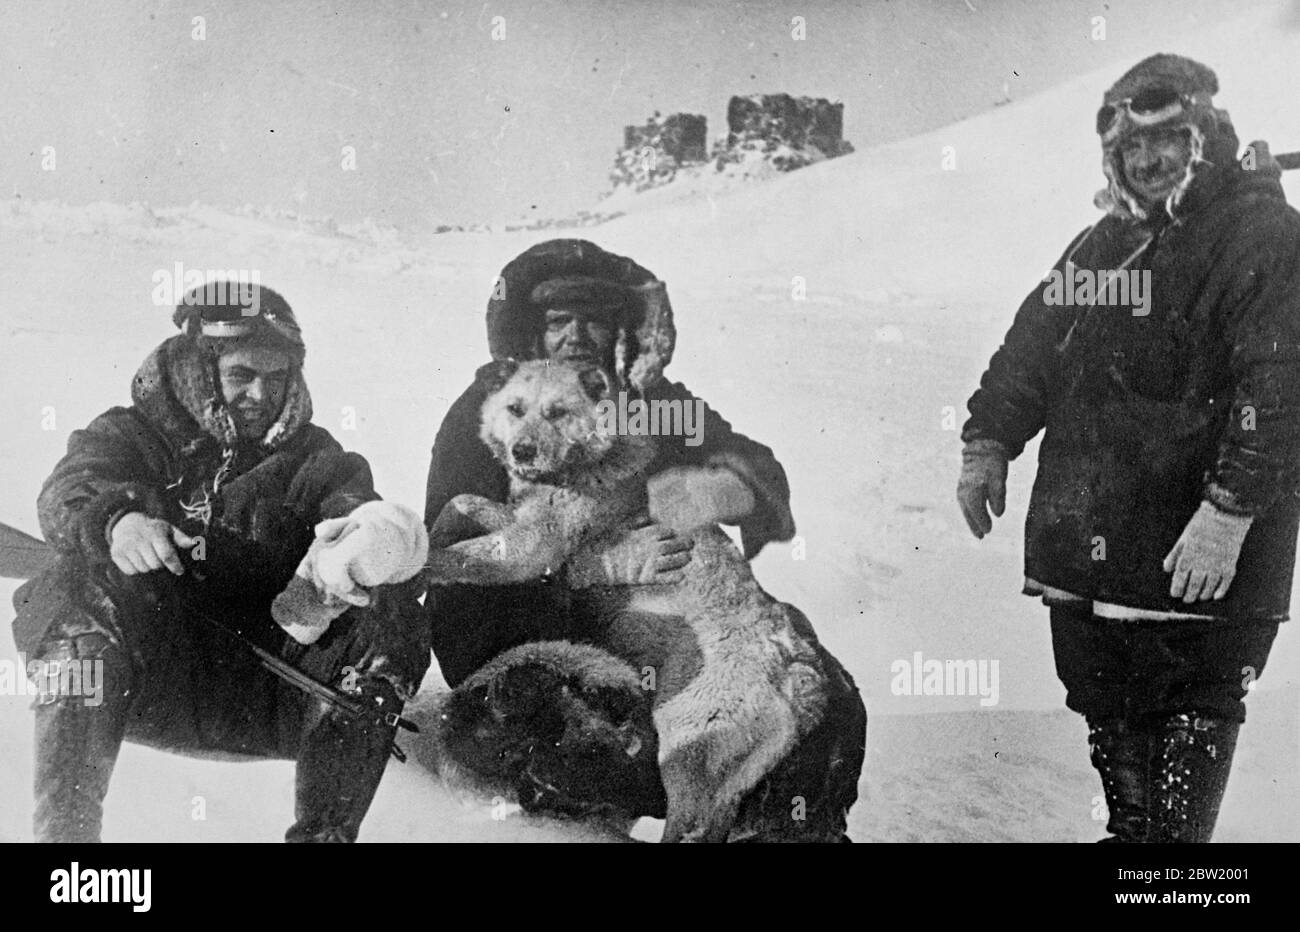 Members of the Soviet polar pioneers expedition with one of their dogs on the ice. Left to right - P.Shirshov; E. Krenkel and I. Papanin, the captain. The Russian scientists are conquering the legendary land of ice and snow on top of the world that is still uncharted. They have settle down for a year's stay on an ice floe at the North Pole and are now making whether surveys. 2 July 1937 Stock Photo